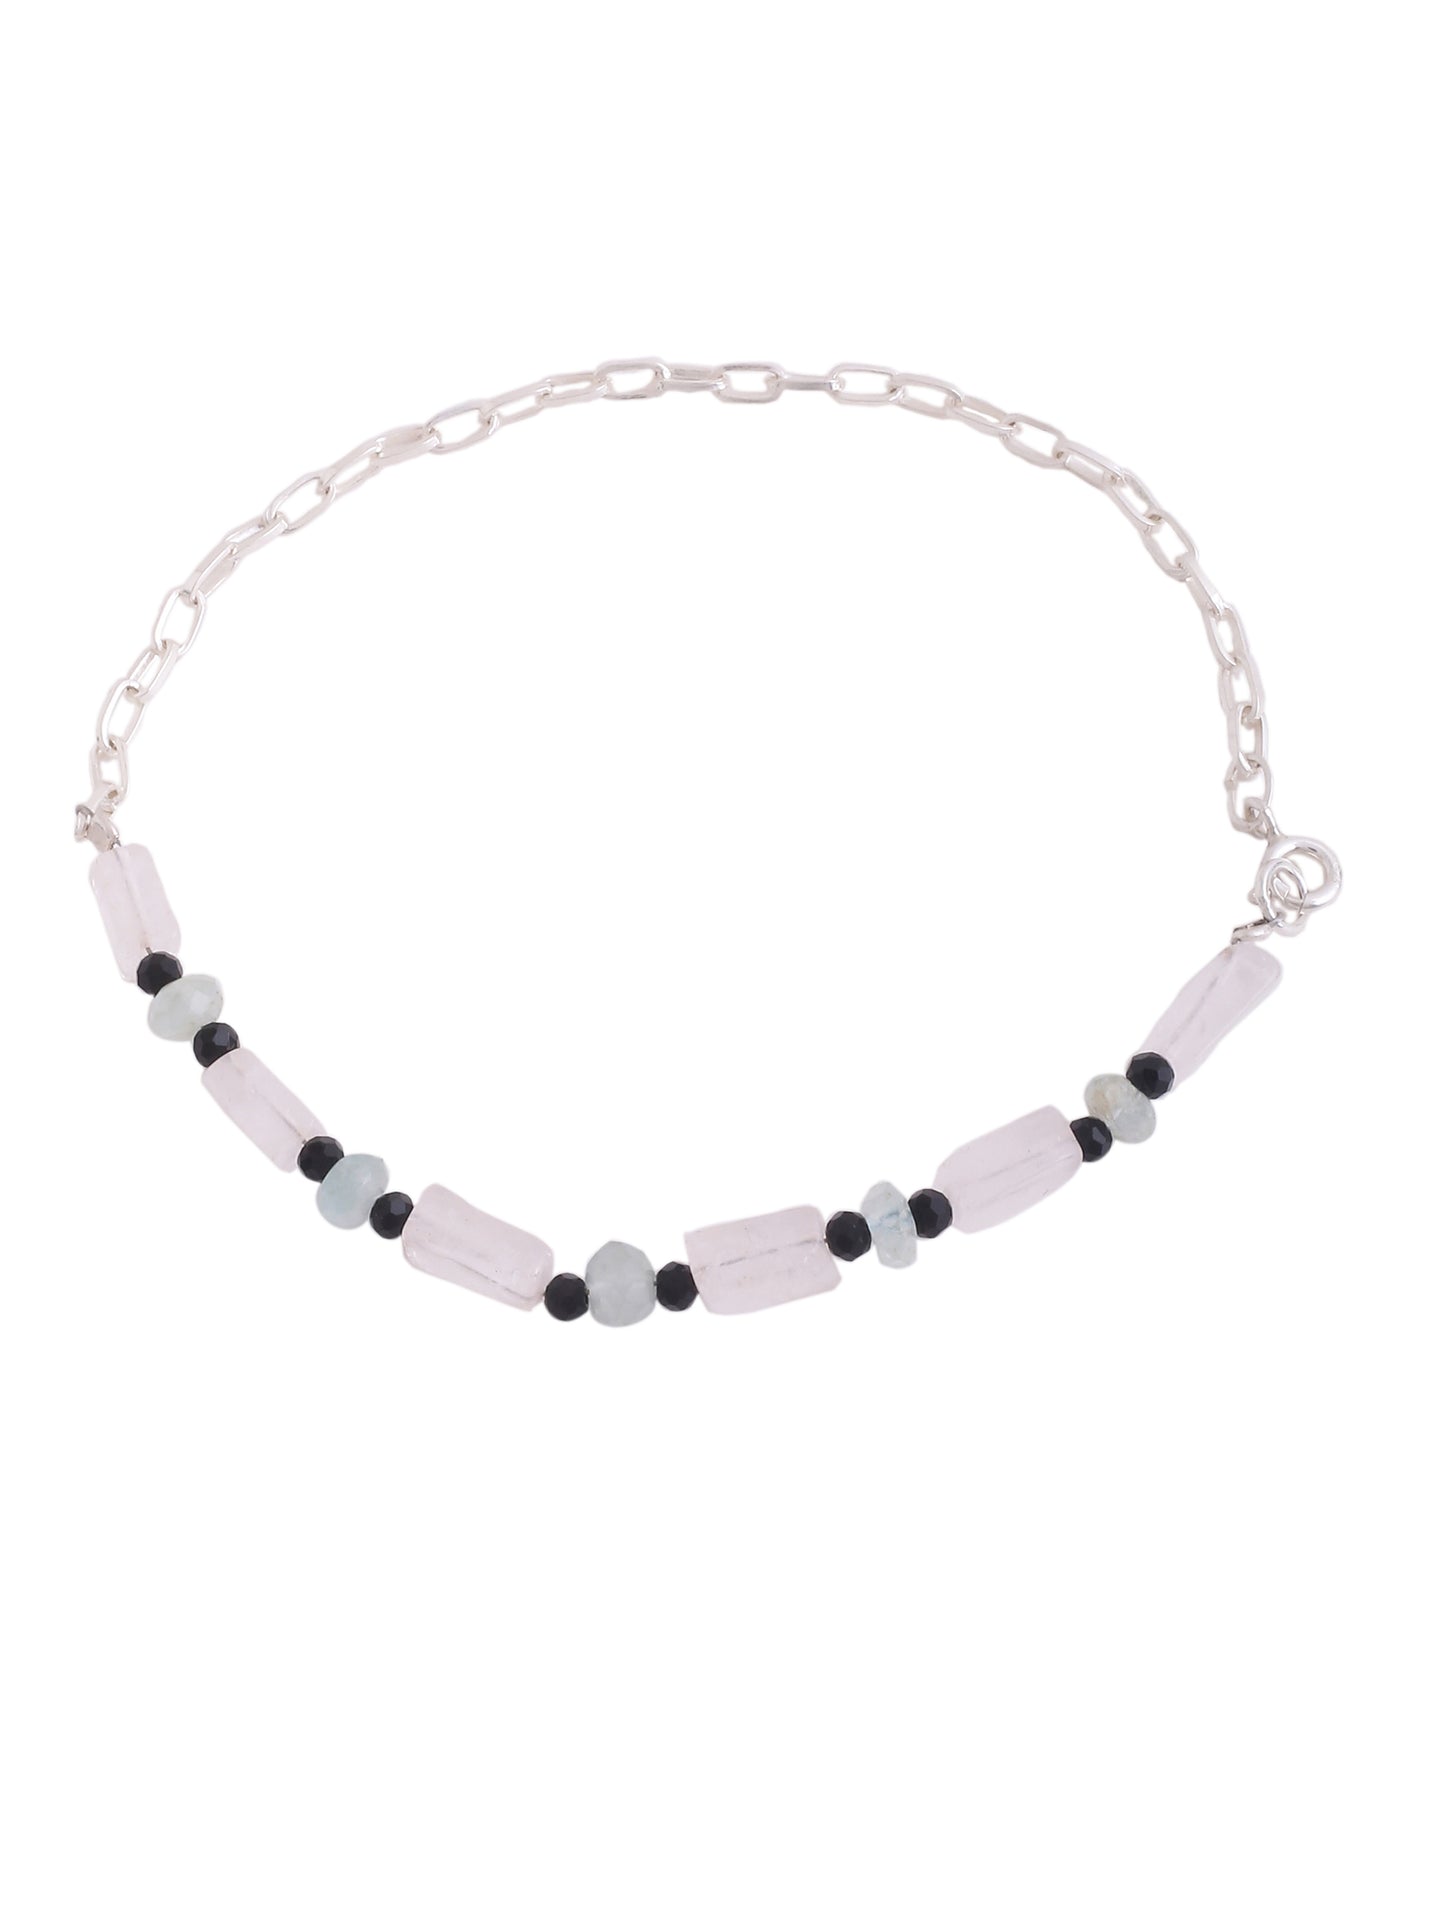 Initial Adorned Anklet in Sterling Silver